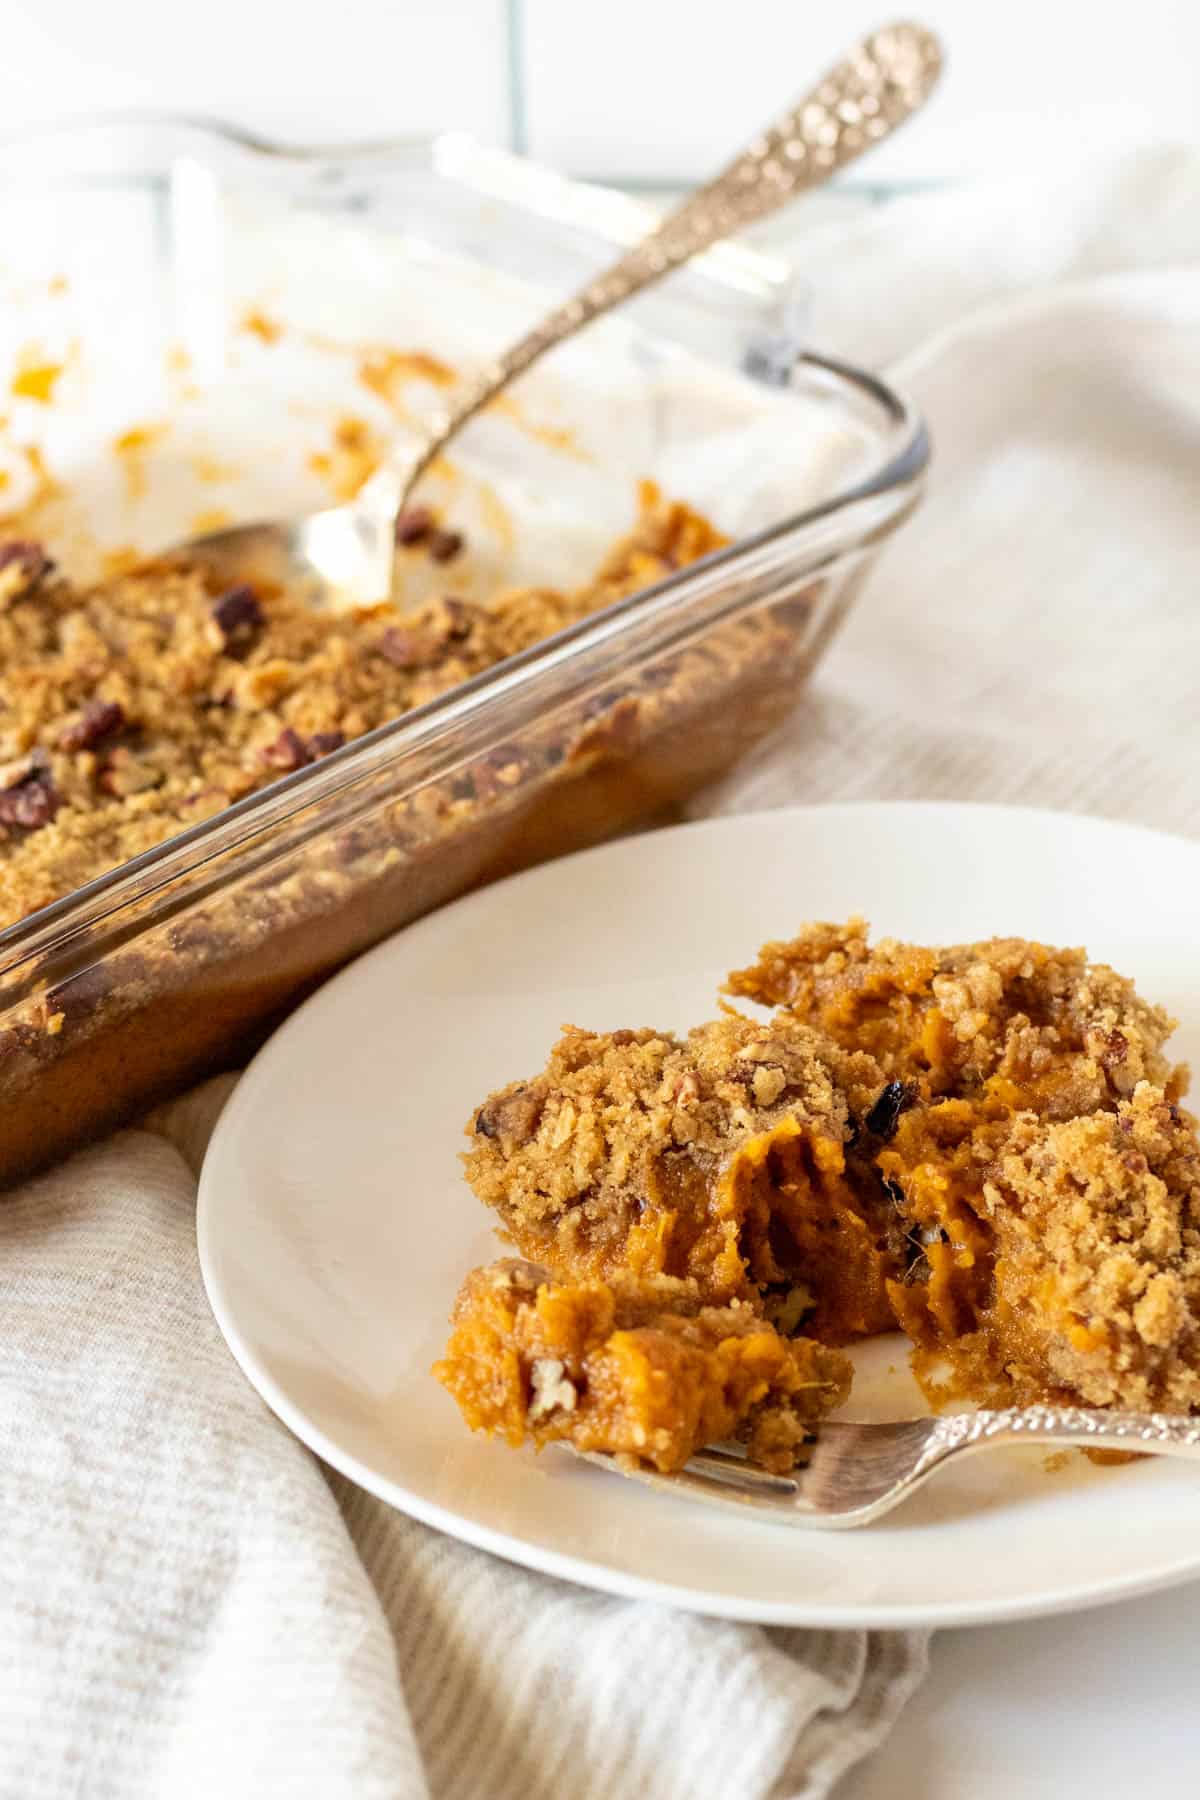 White plate with serving of sweet potato casserole.